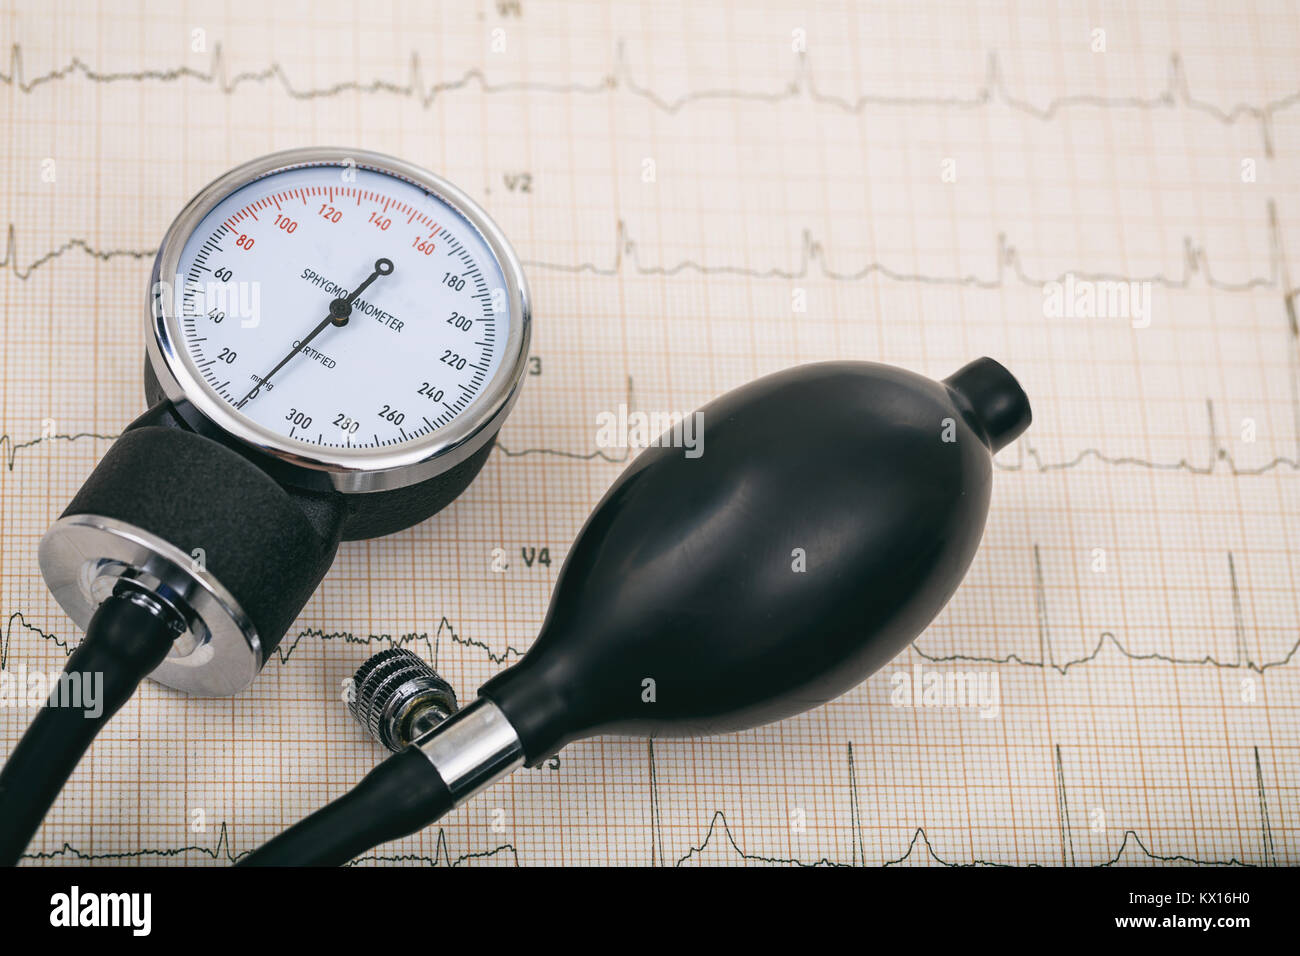 Blood pressure manometer on a cardiogram Stock Photo